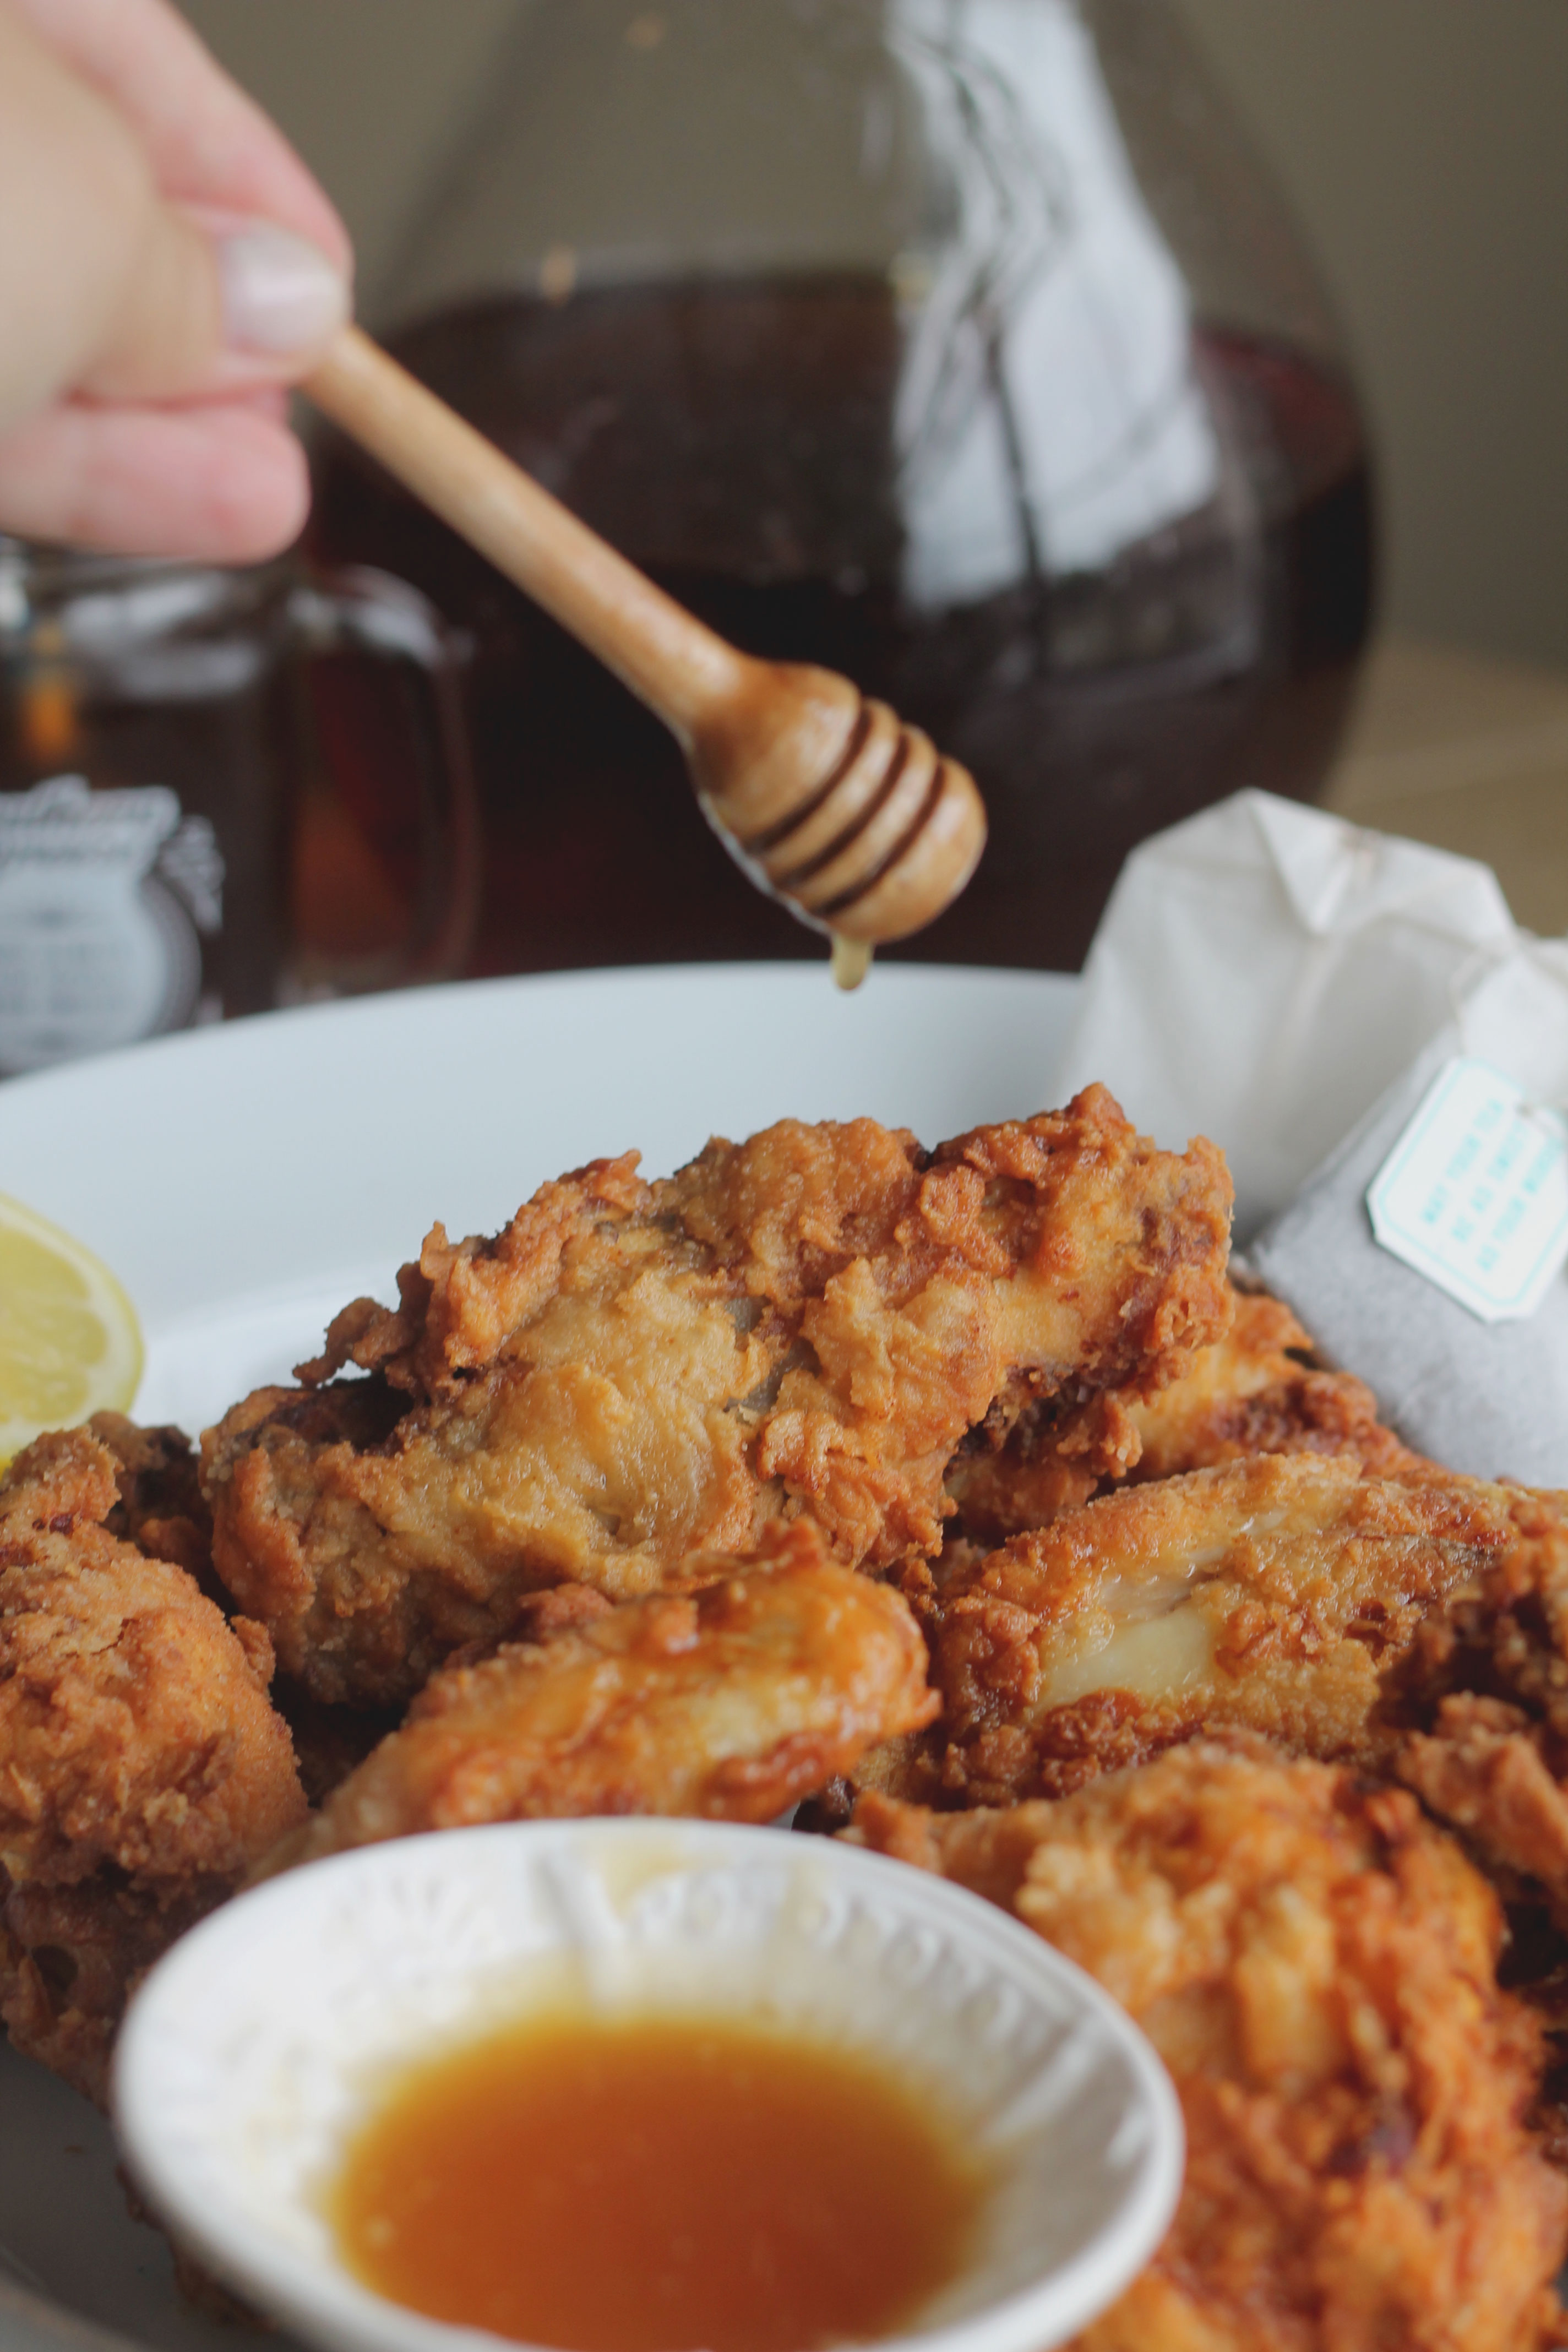 For the tastiest chicken ever brine it in sweet tea then top it with bourbon maple syrup